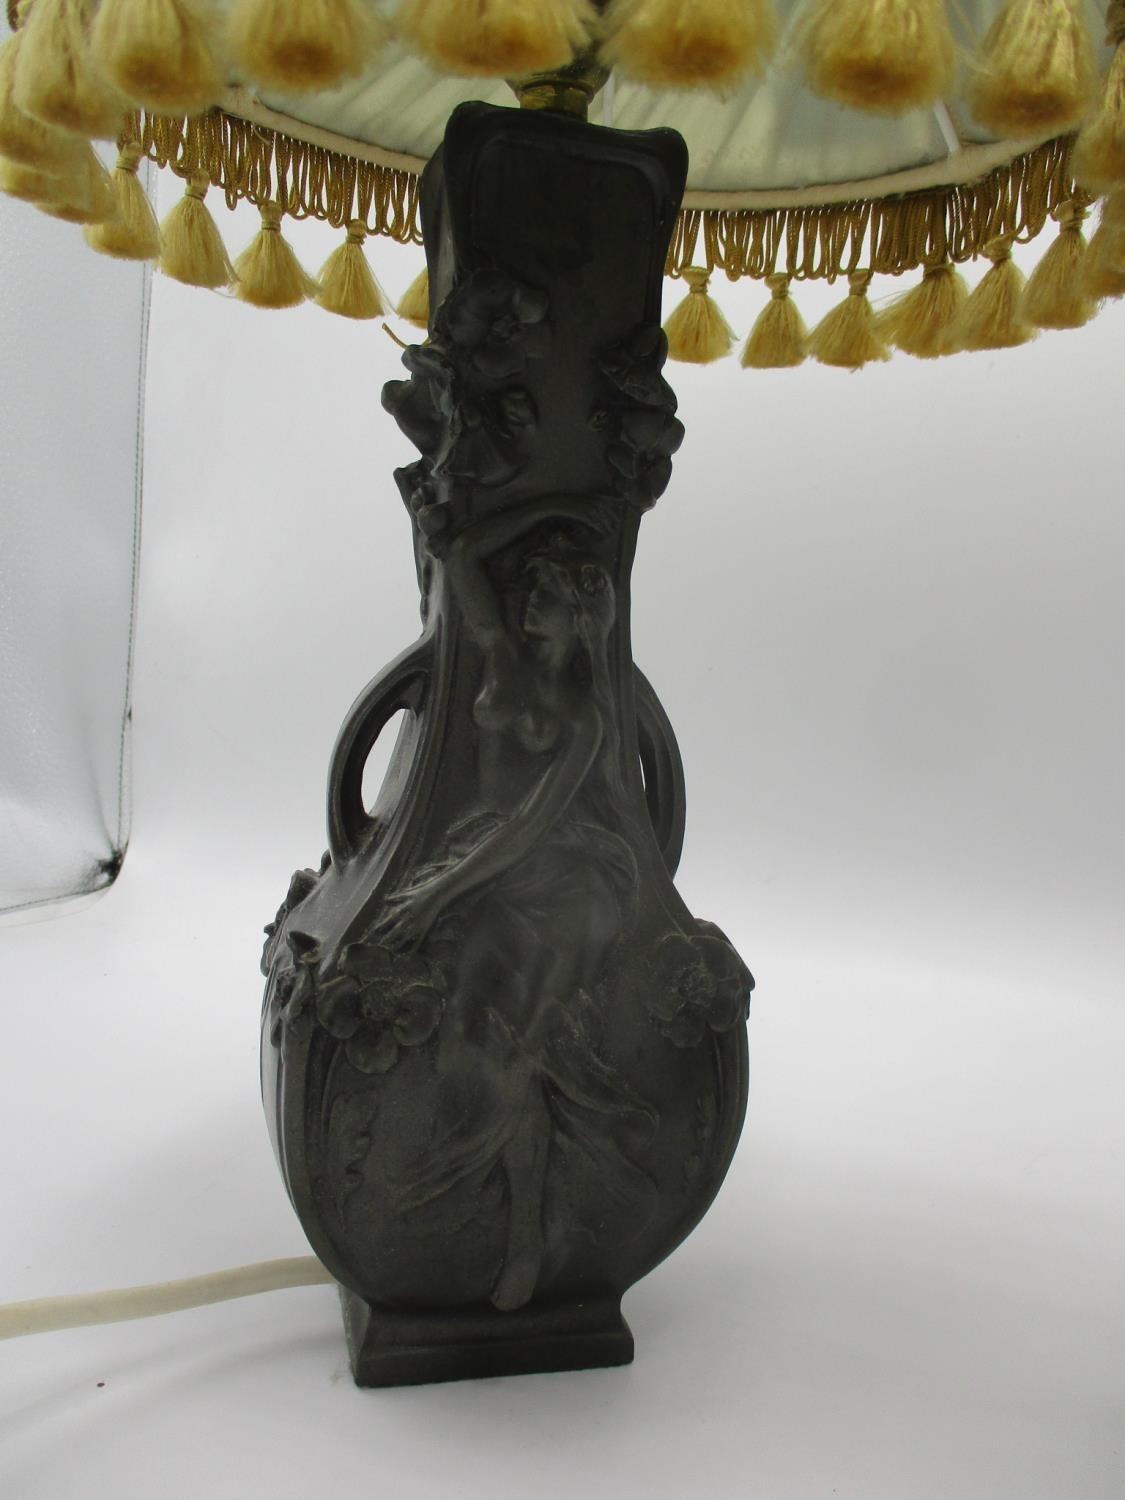 A pair of resin table lamps in the style of Art Nouveau twin handled pewter vases, (lamp shades A/ - Image 3 of 3